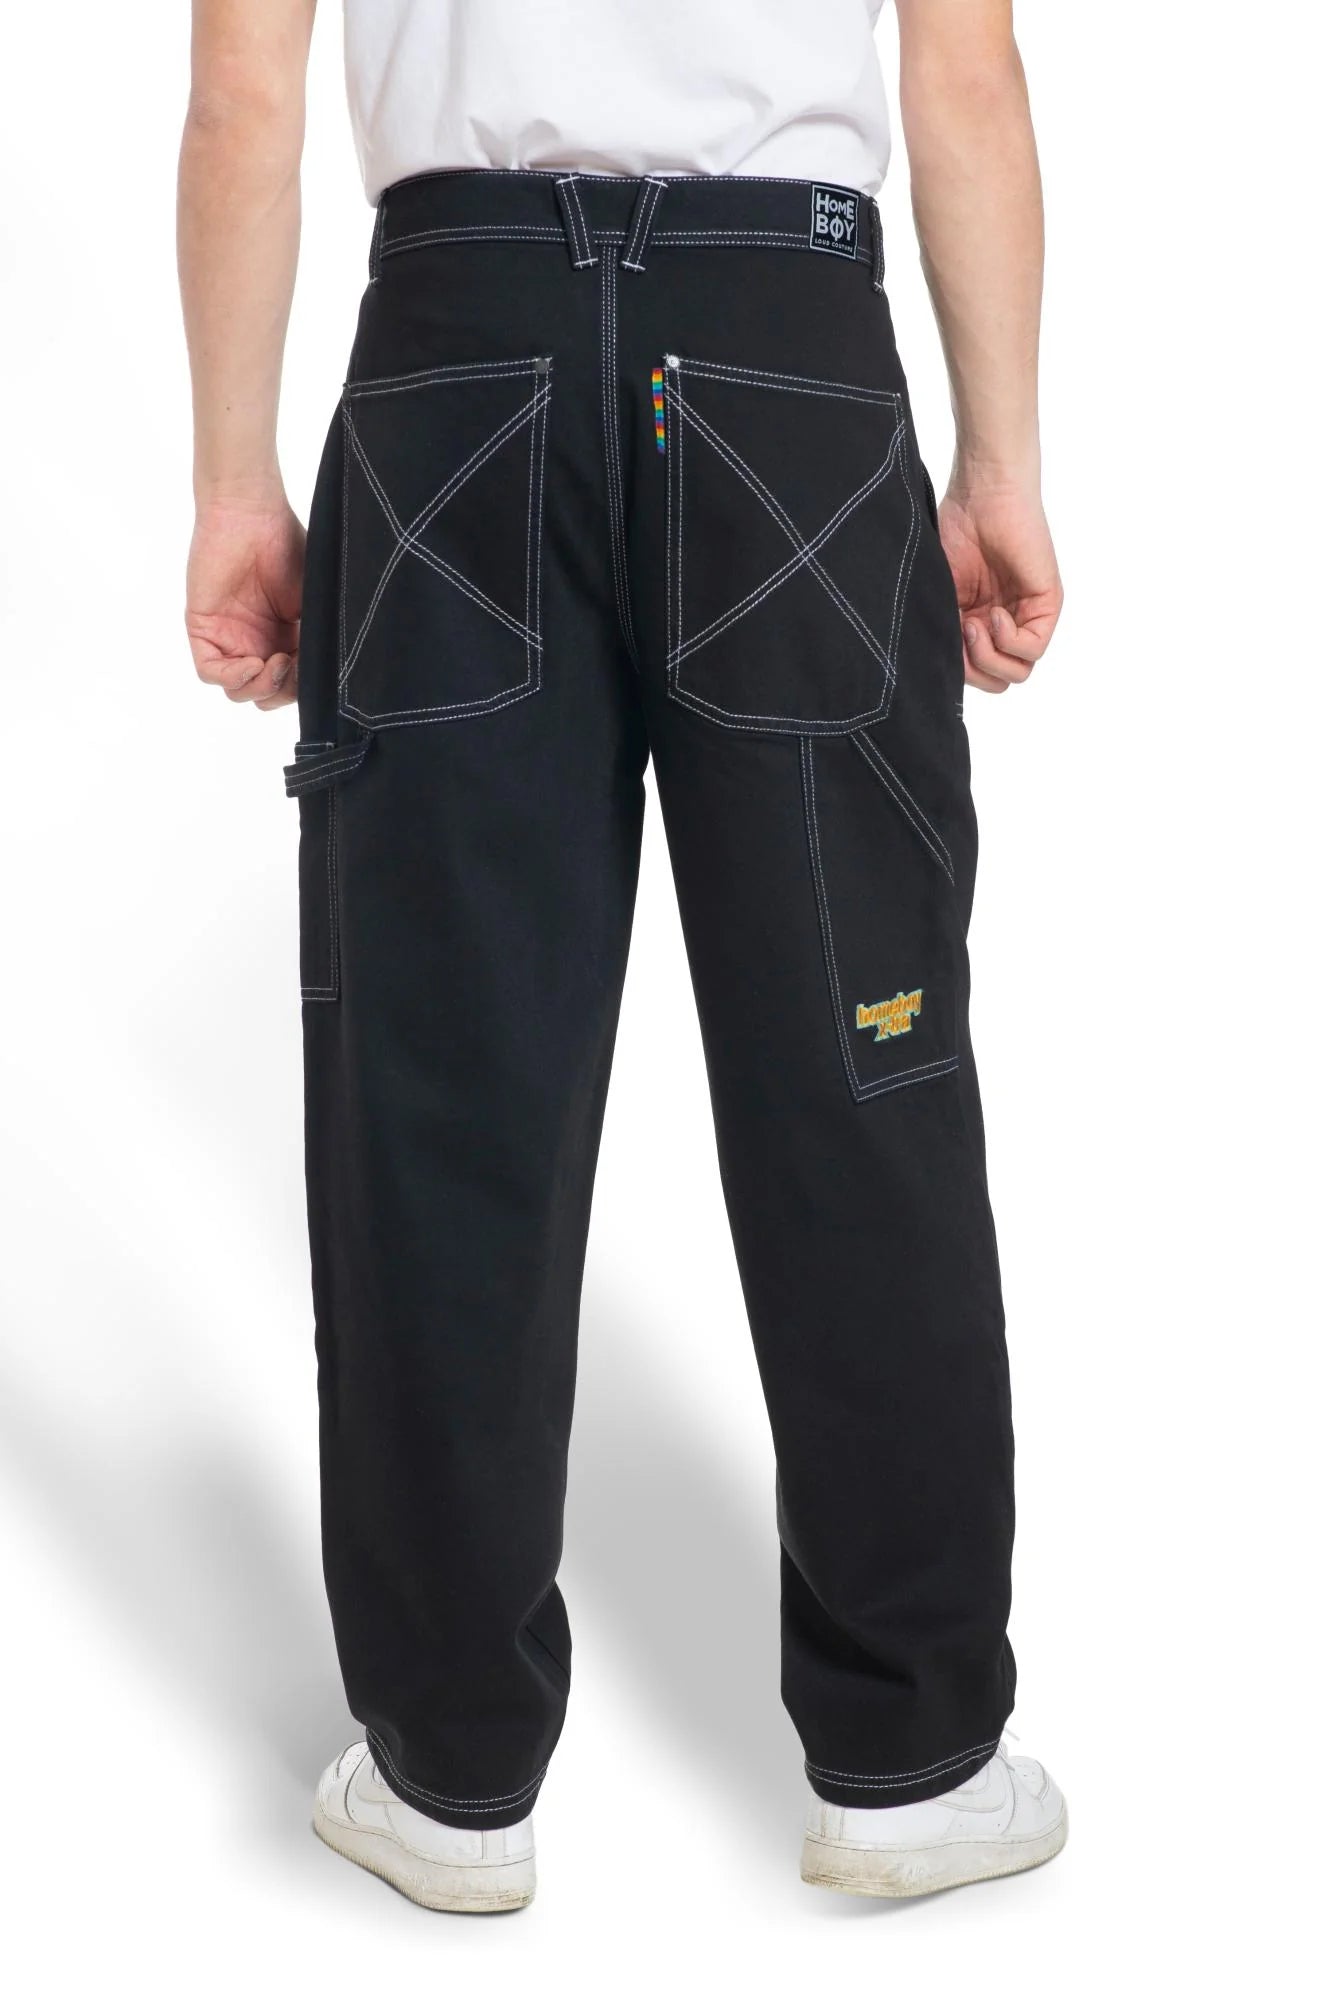 Baggy worker pant